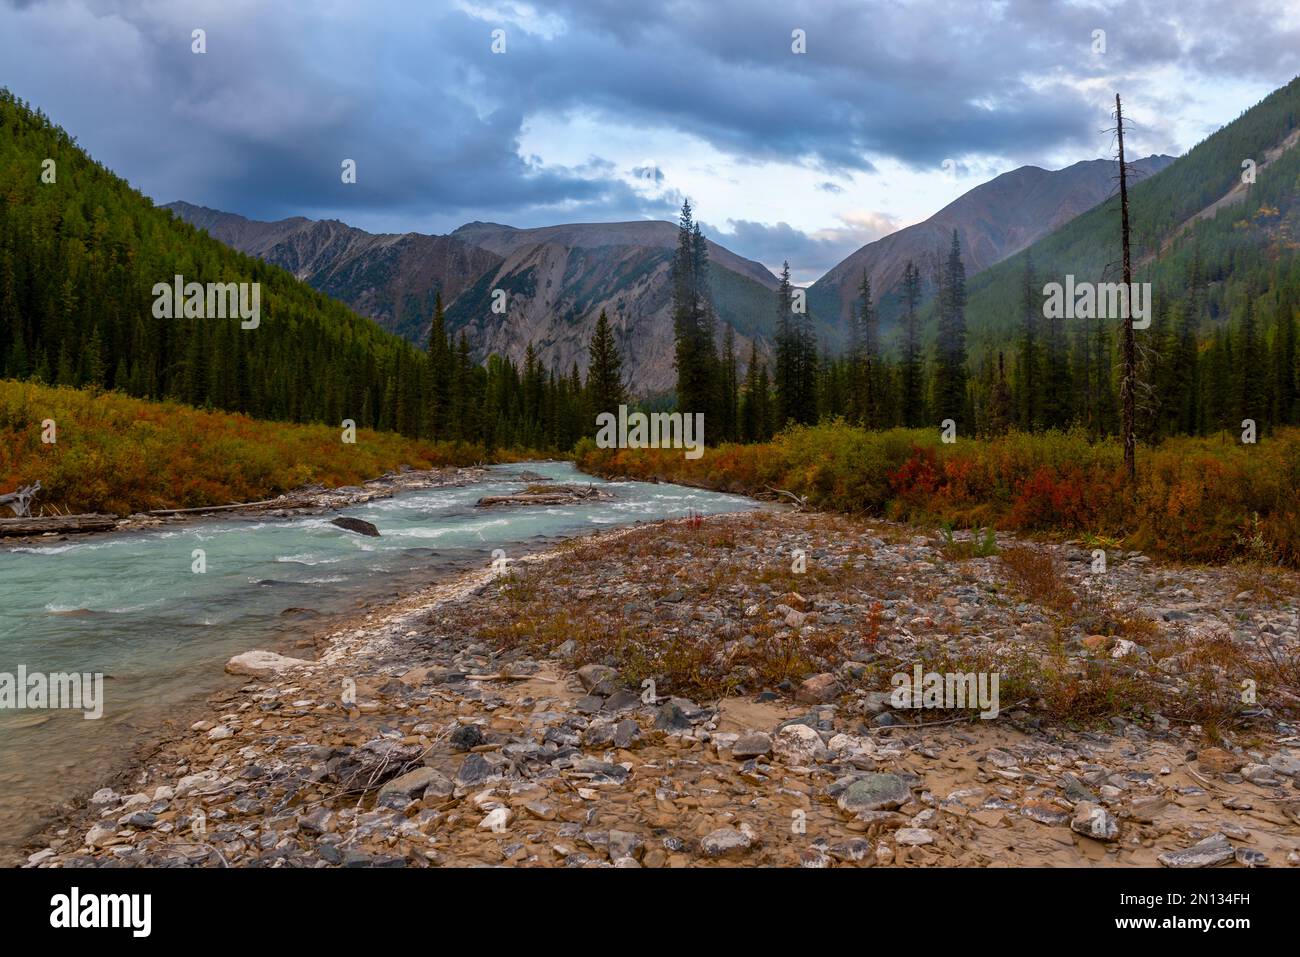 The drying bed of the alpine river Shavla in autumn against the backdrop of a rainy sky and mountains with a spruce forest in Altai. Stock Photo